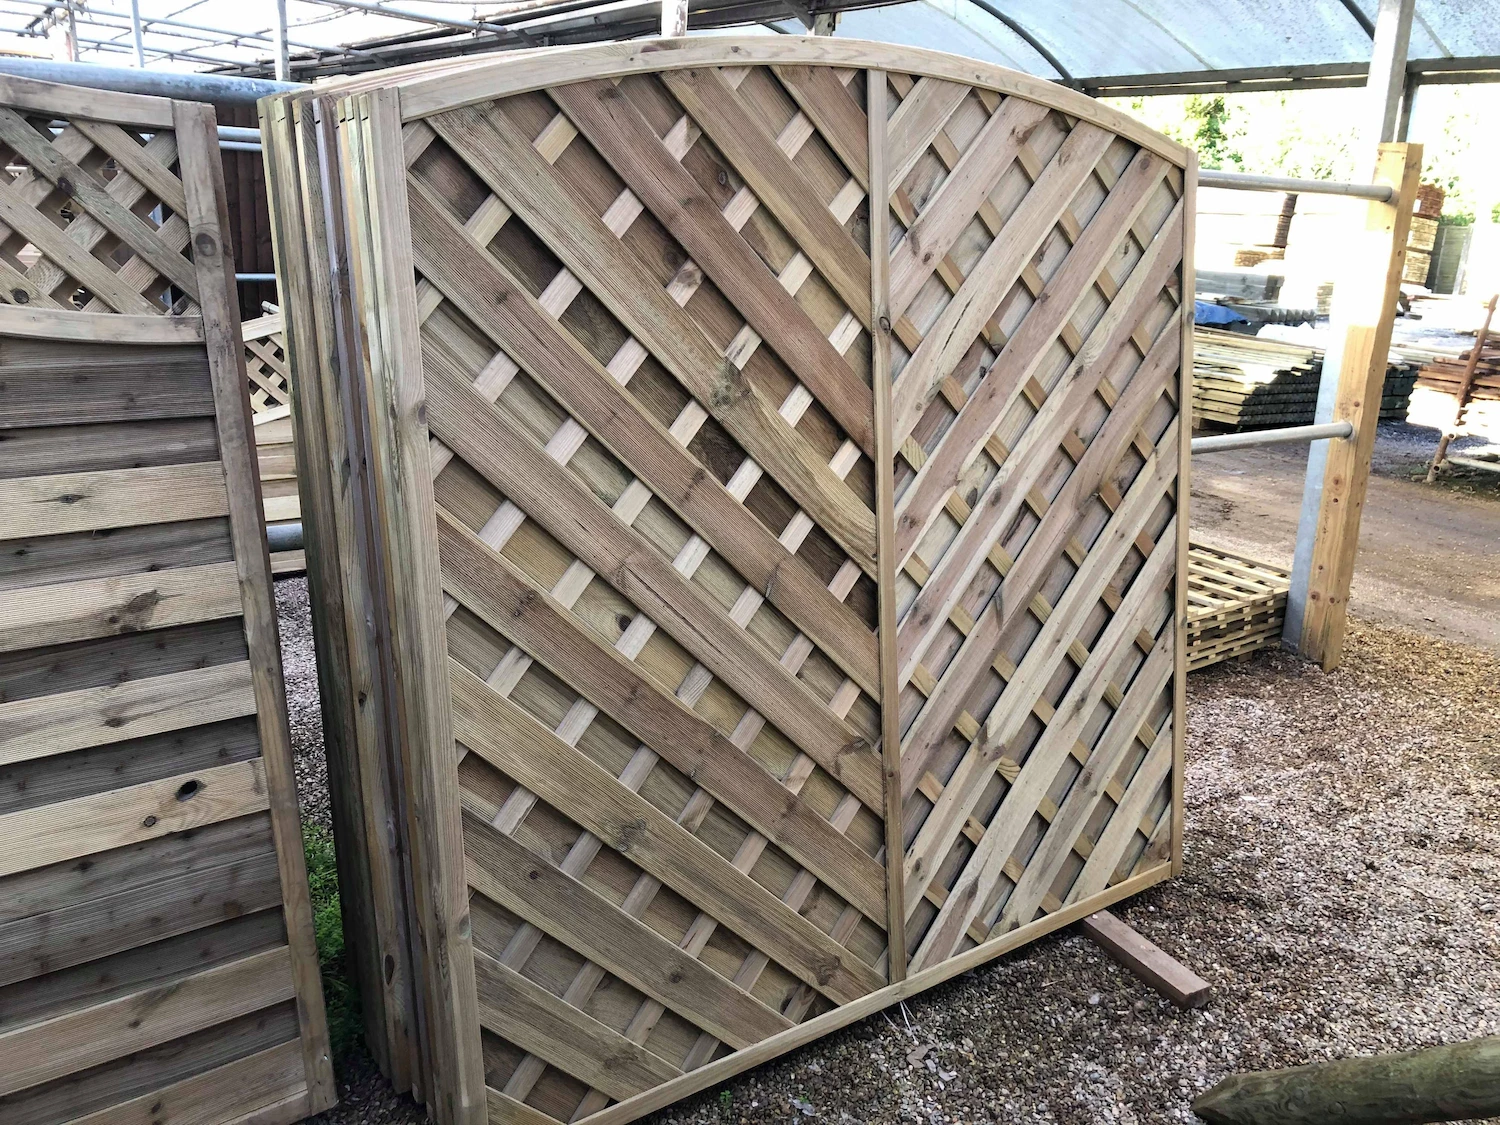 Elite lunairs dome fence panels for sale in Hampshire and Salisbury.